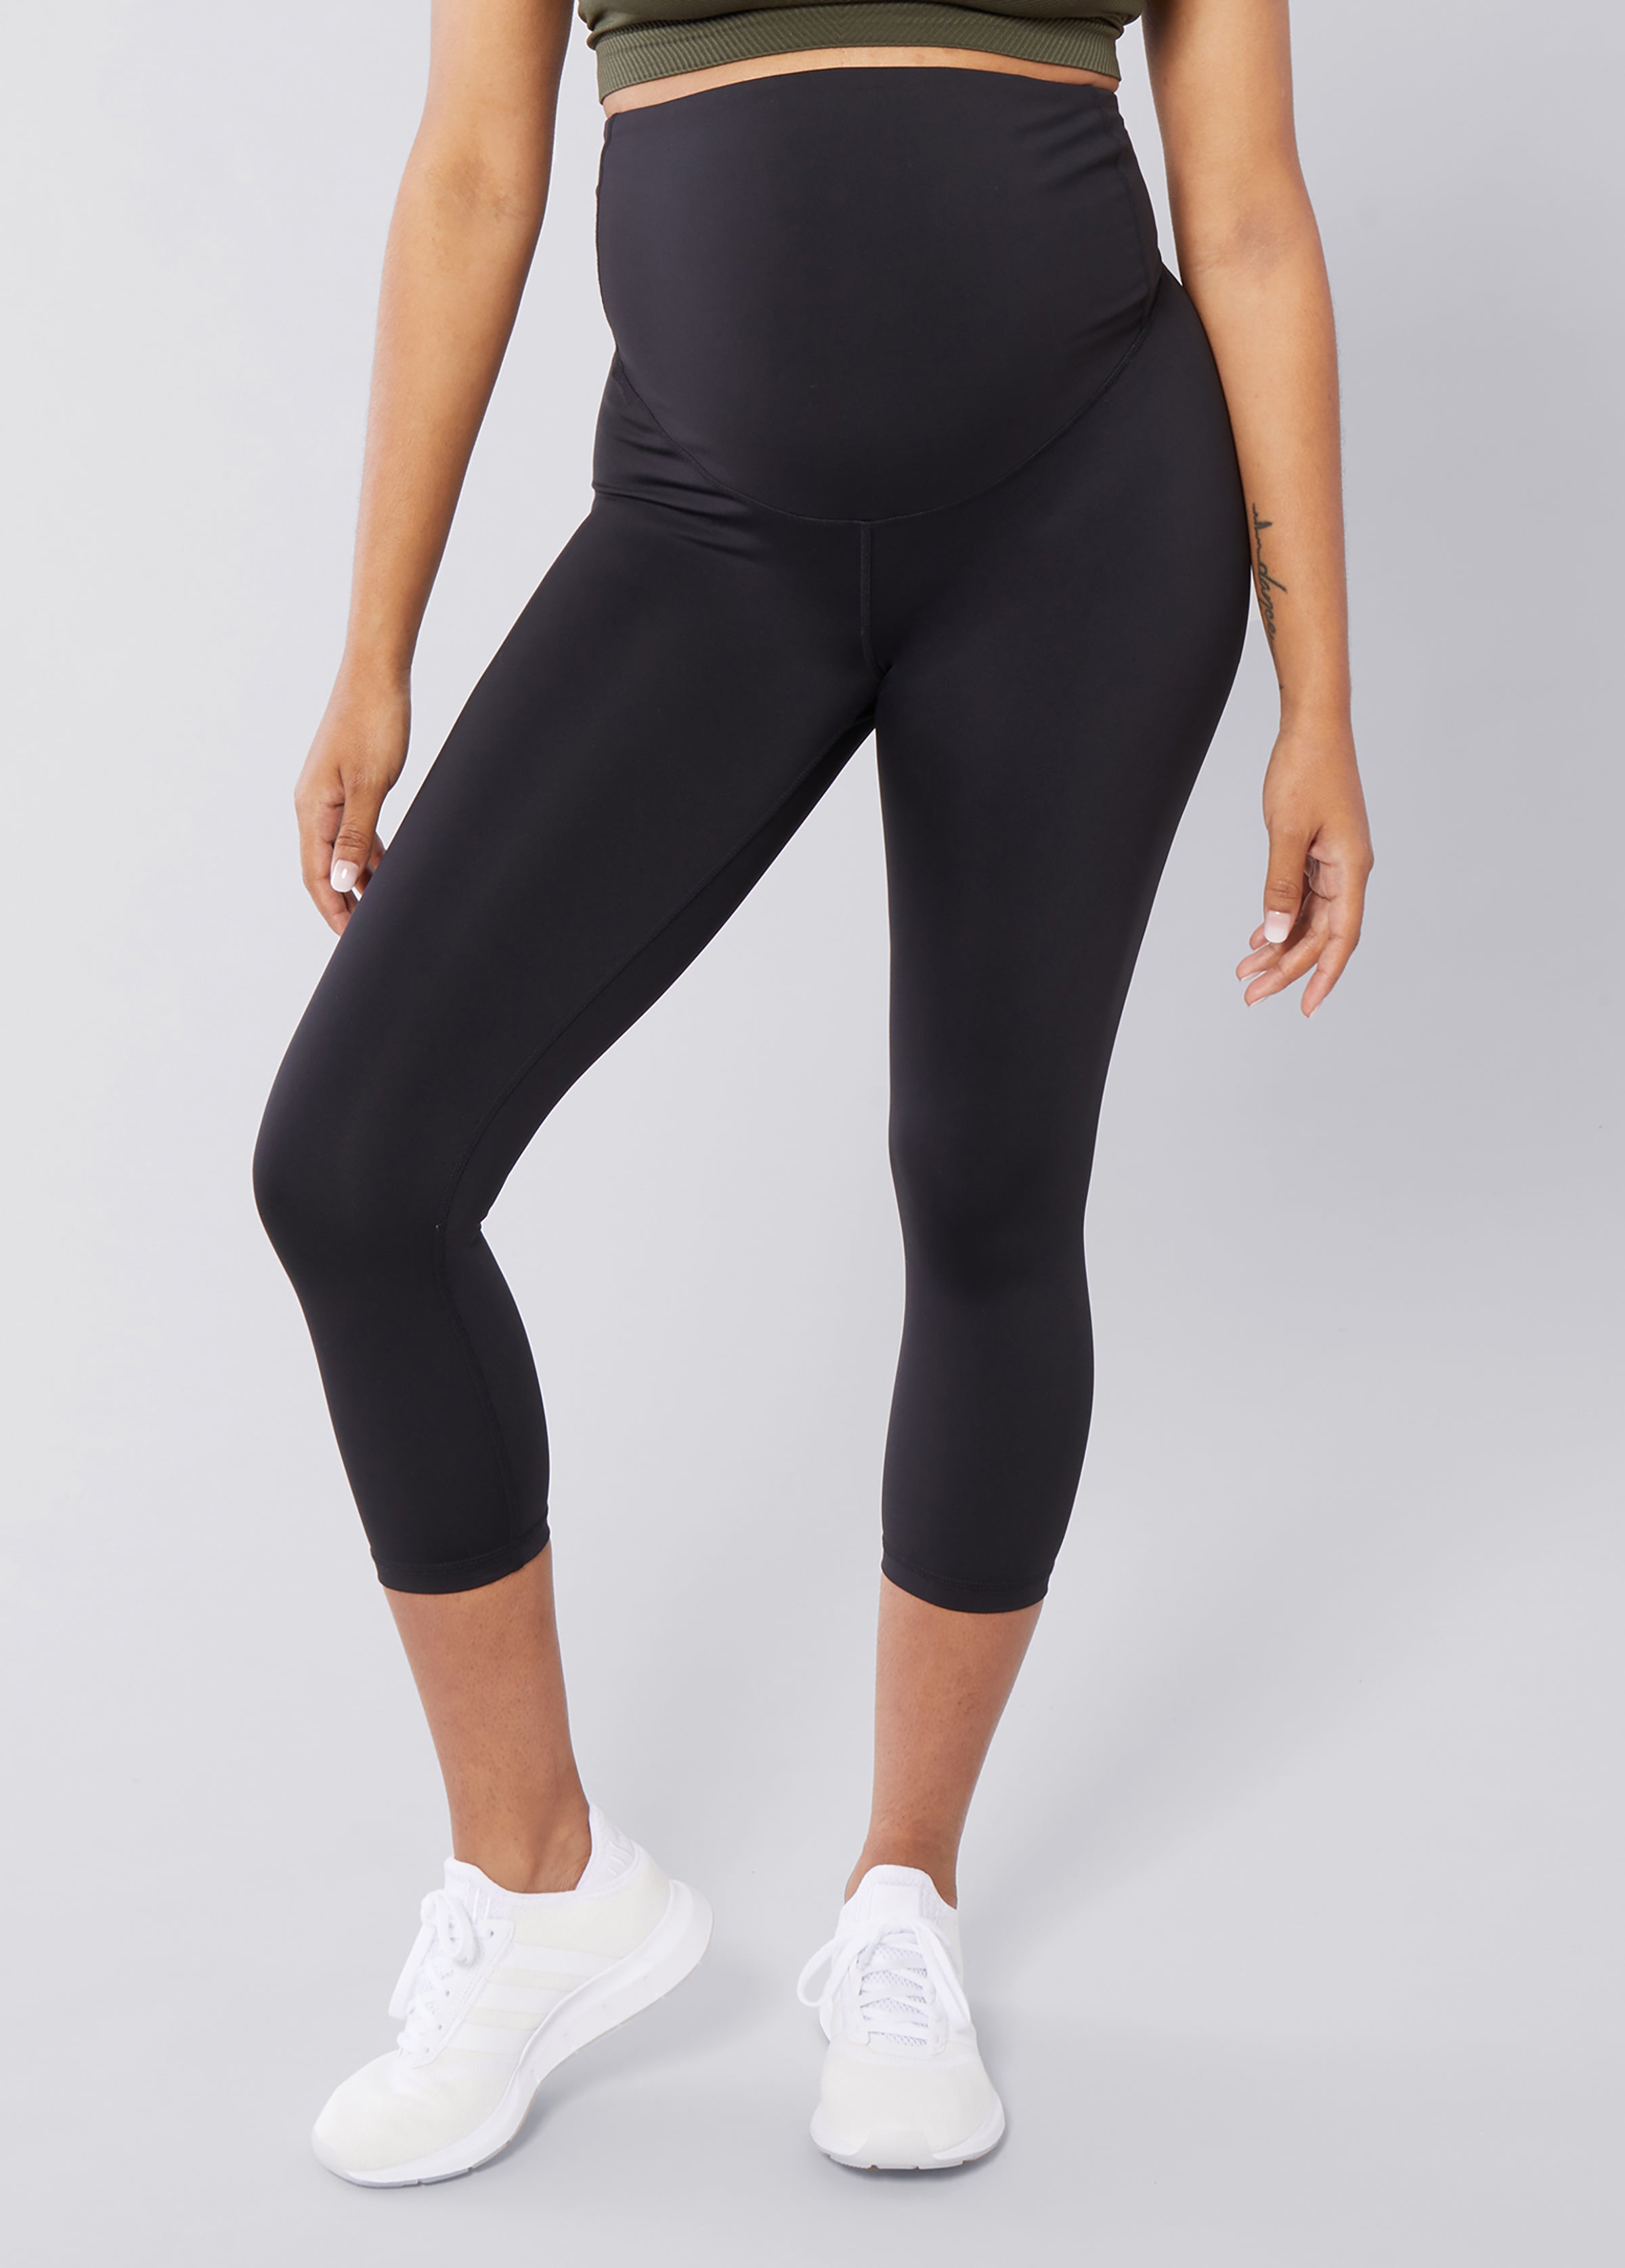 The Performance Cropped Legging